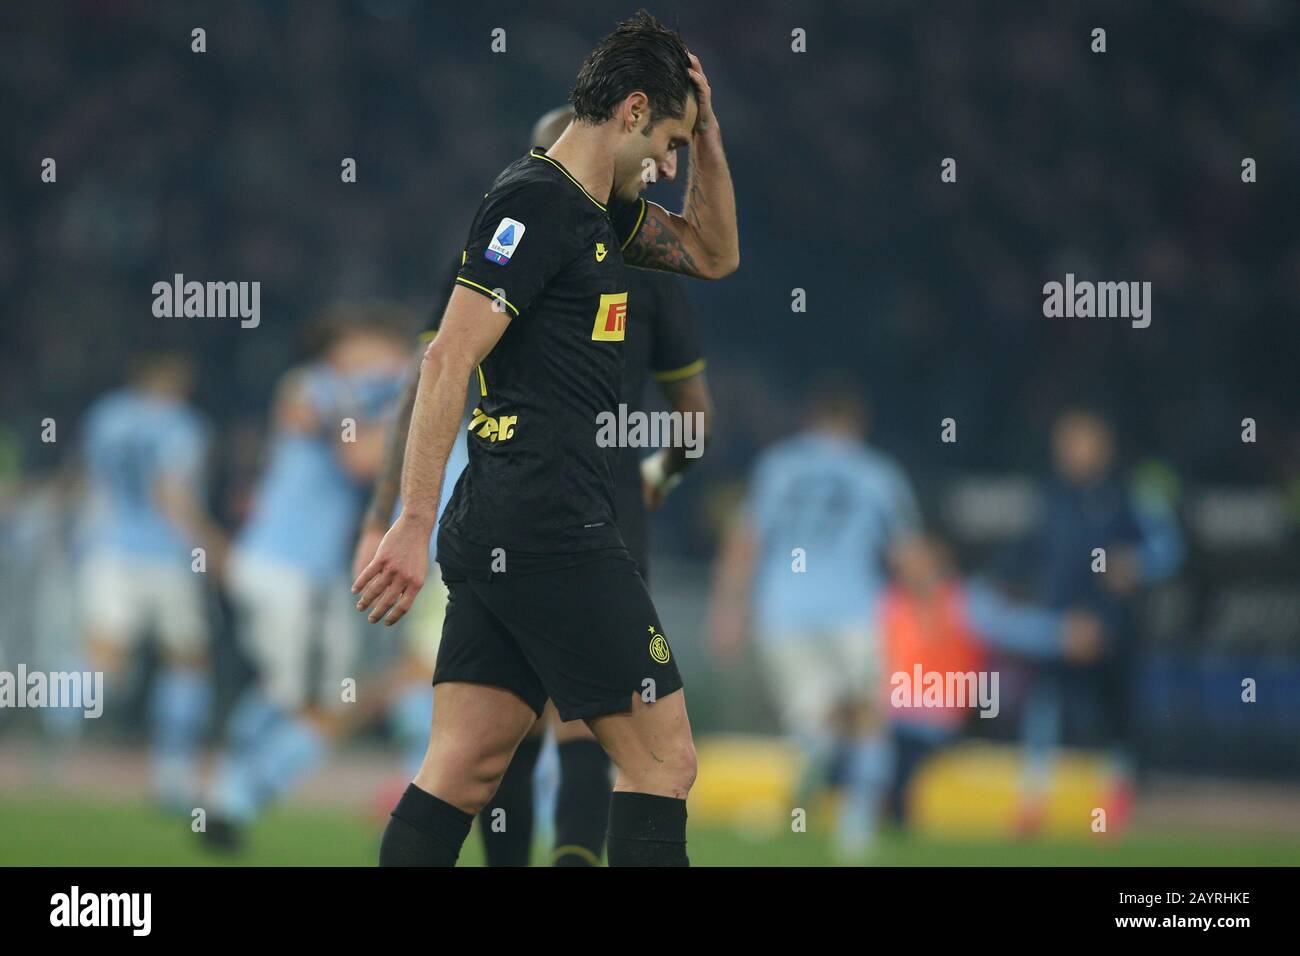 Rome, Italy. 17th Feb, 2020. Rome, Italy - 16.02.2020: Disappointment A.Candreva (F.c. Inter) during the Italian Serie A soccer match 24 between Ss Lazio vs FC Inter Milan, at Olympic Stadium in Rome. Credit: Independent Photo Agency/Alamy Live News Stock Photo